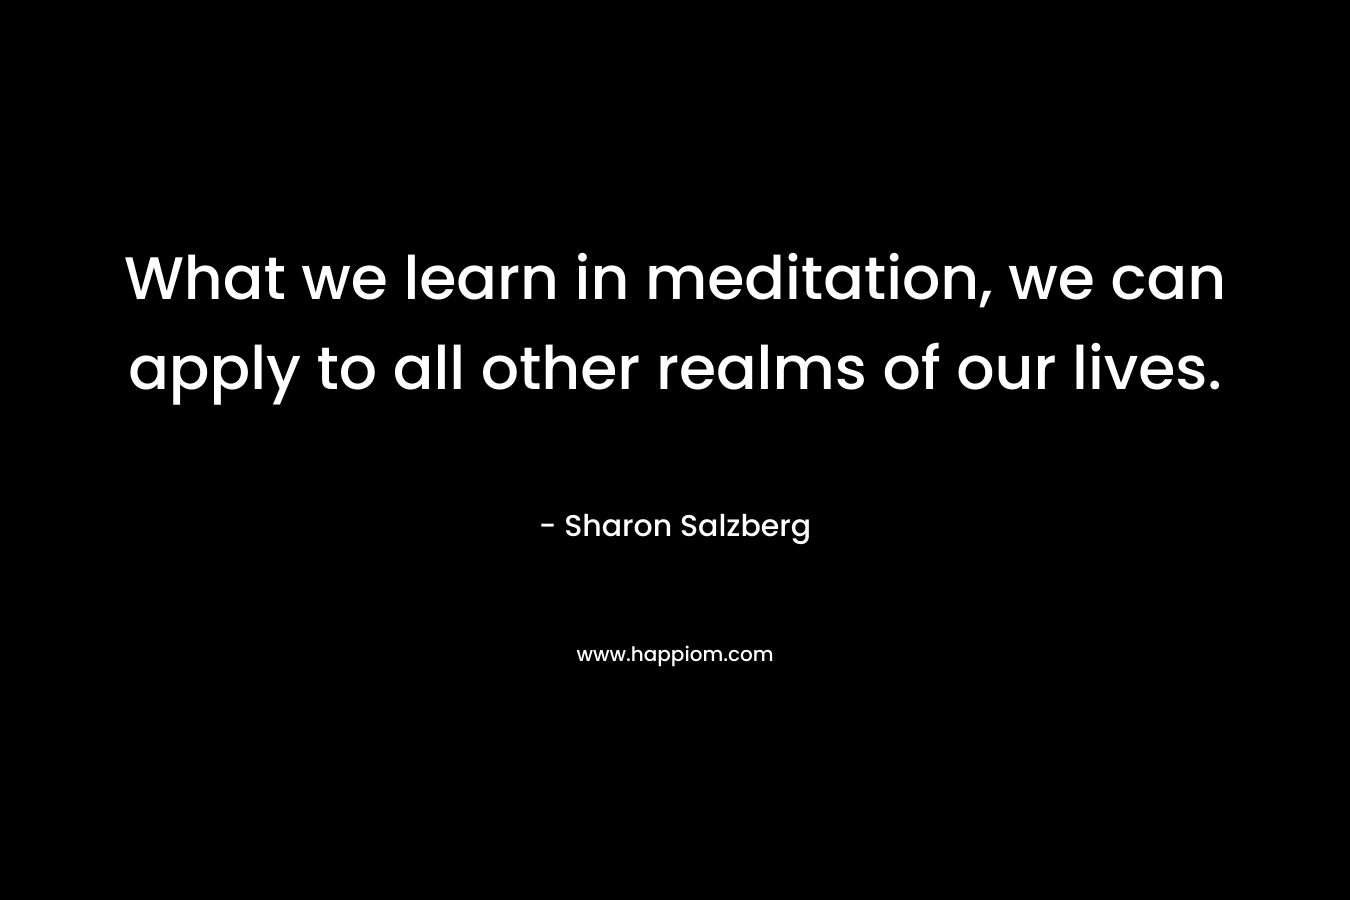 What we learn in meditation, we can apply to all other realms of our lives. – Sharon Salzberg